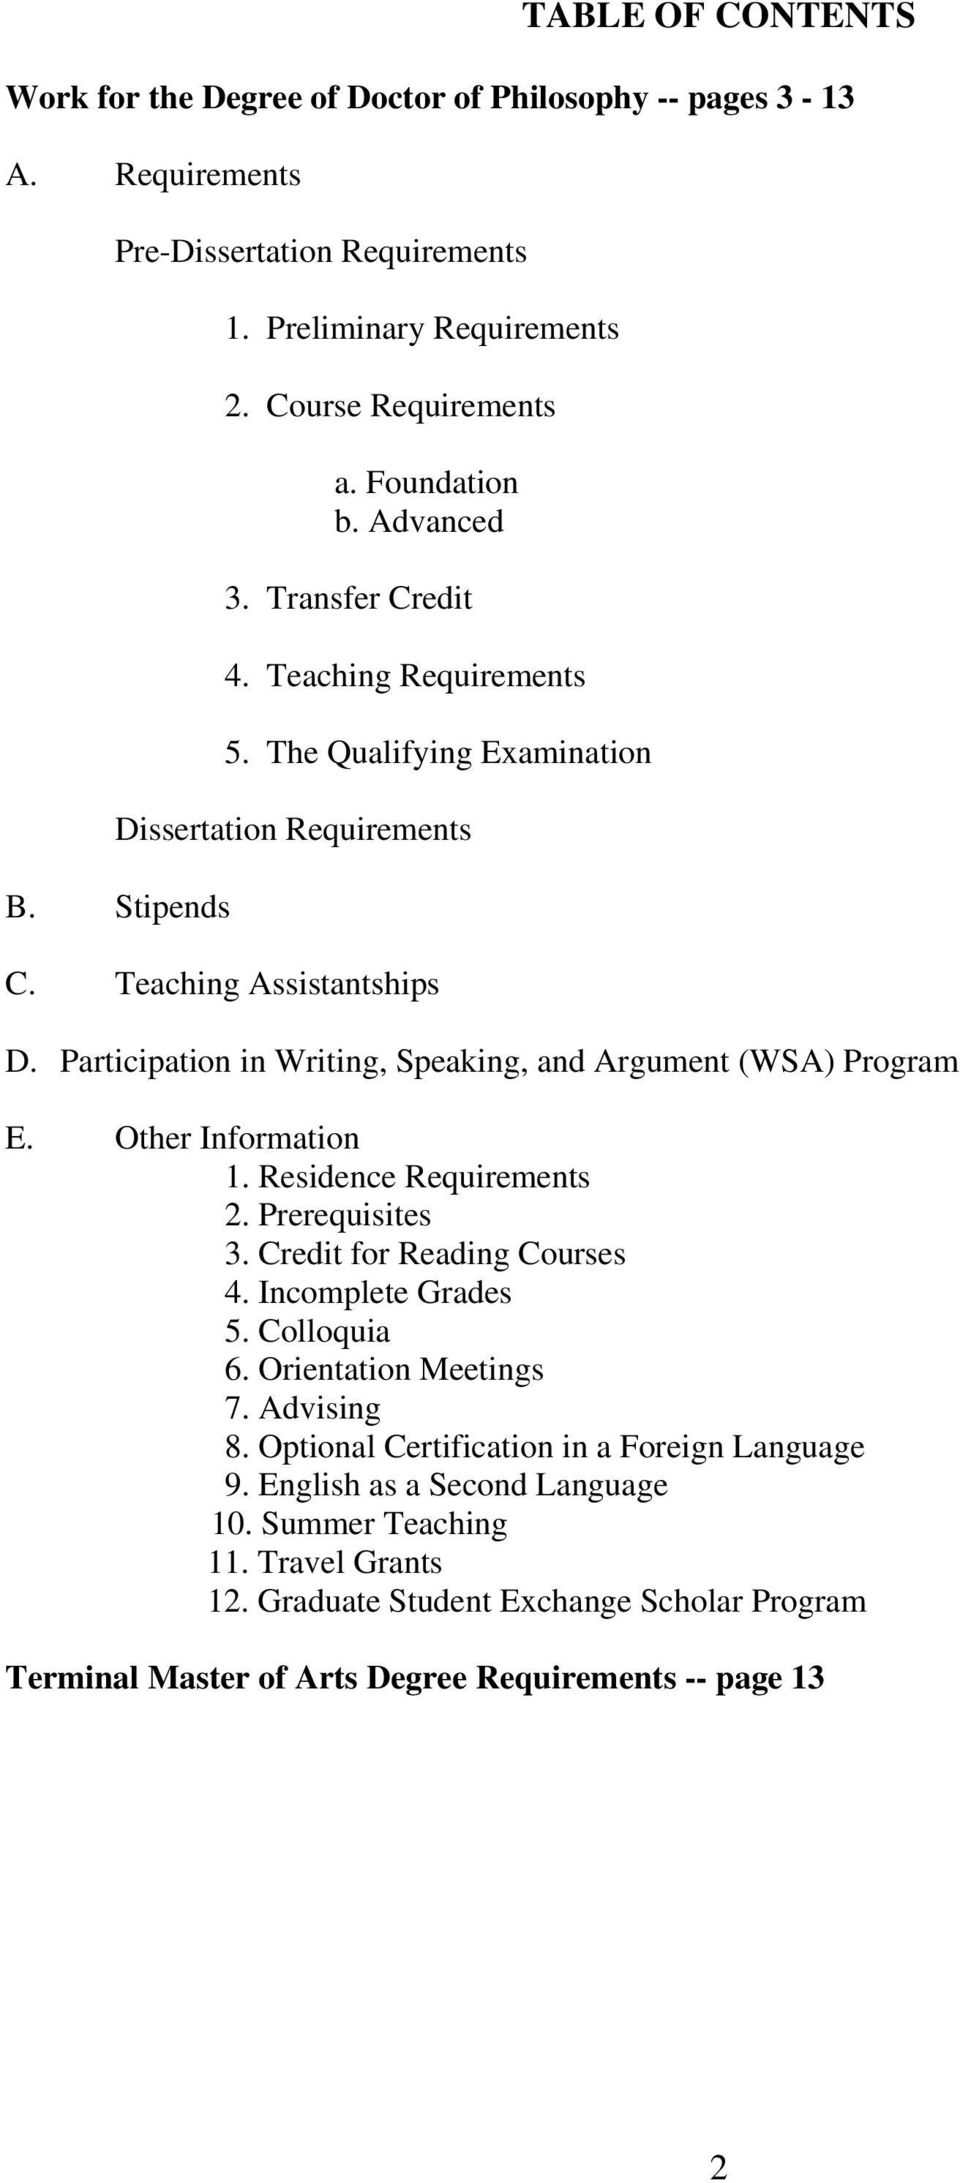 Participation in Writing, Speaking, and Argument (WSA) Program E. Other Information 1. Residence Requirements 2. Prerequisites 3. Credit for Reading Courses 4. Incomplete Grades 5. Colloquia 6.